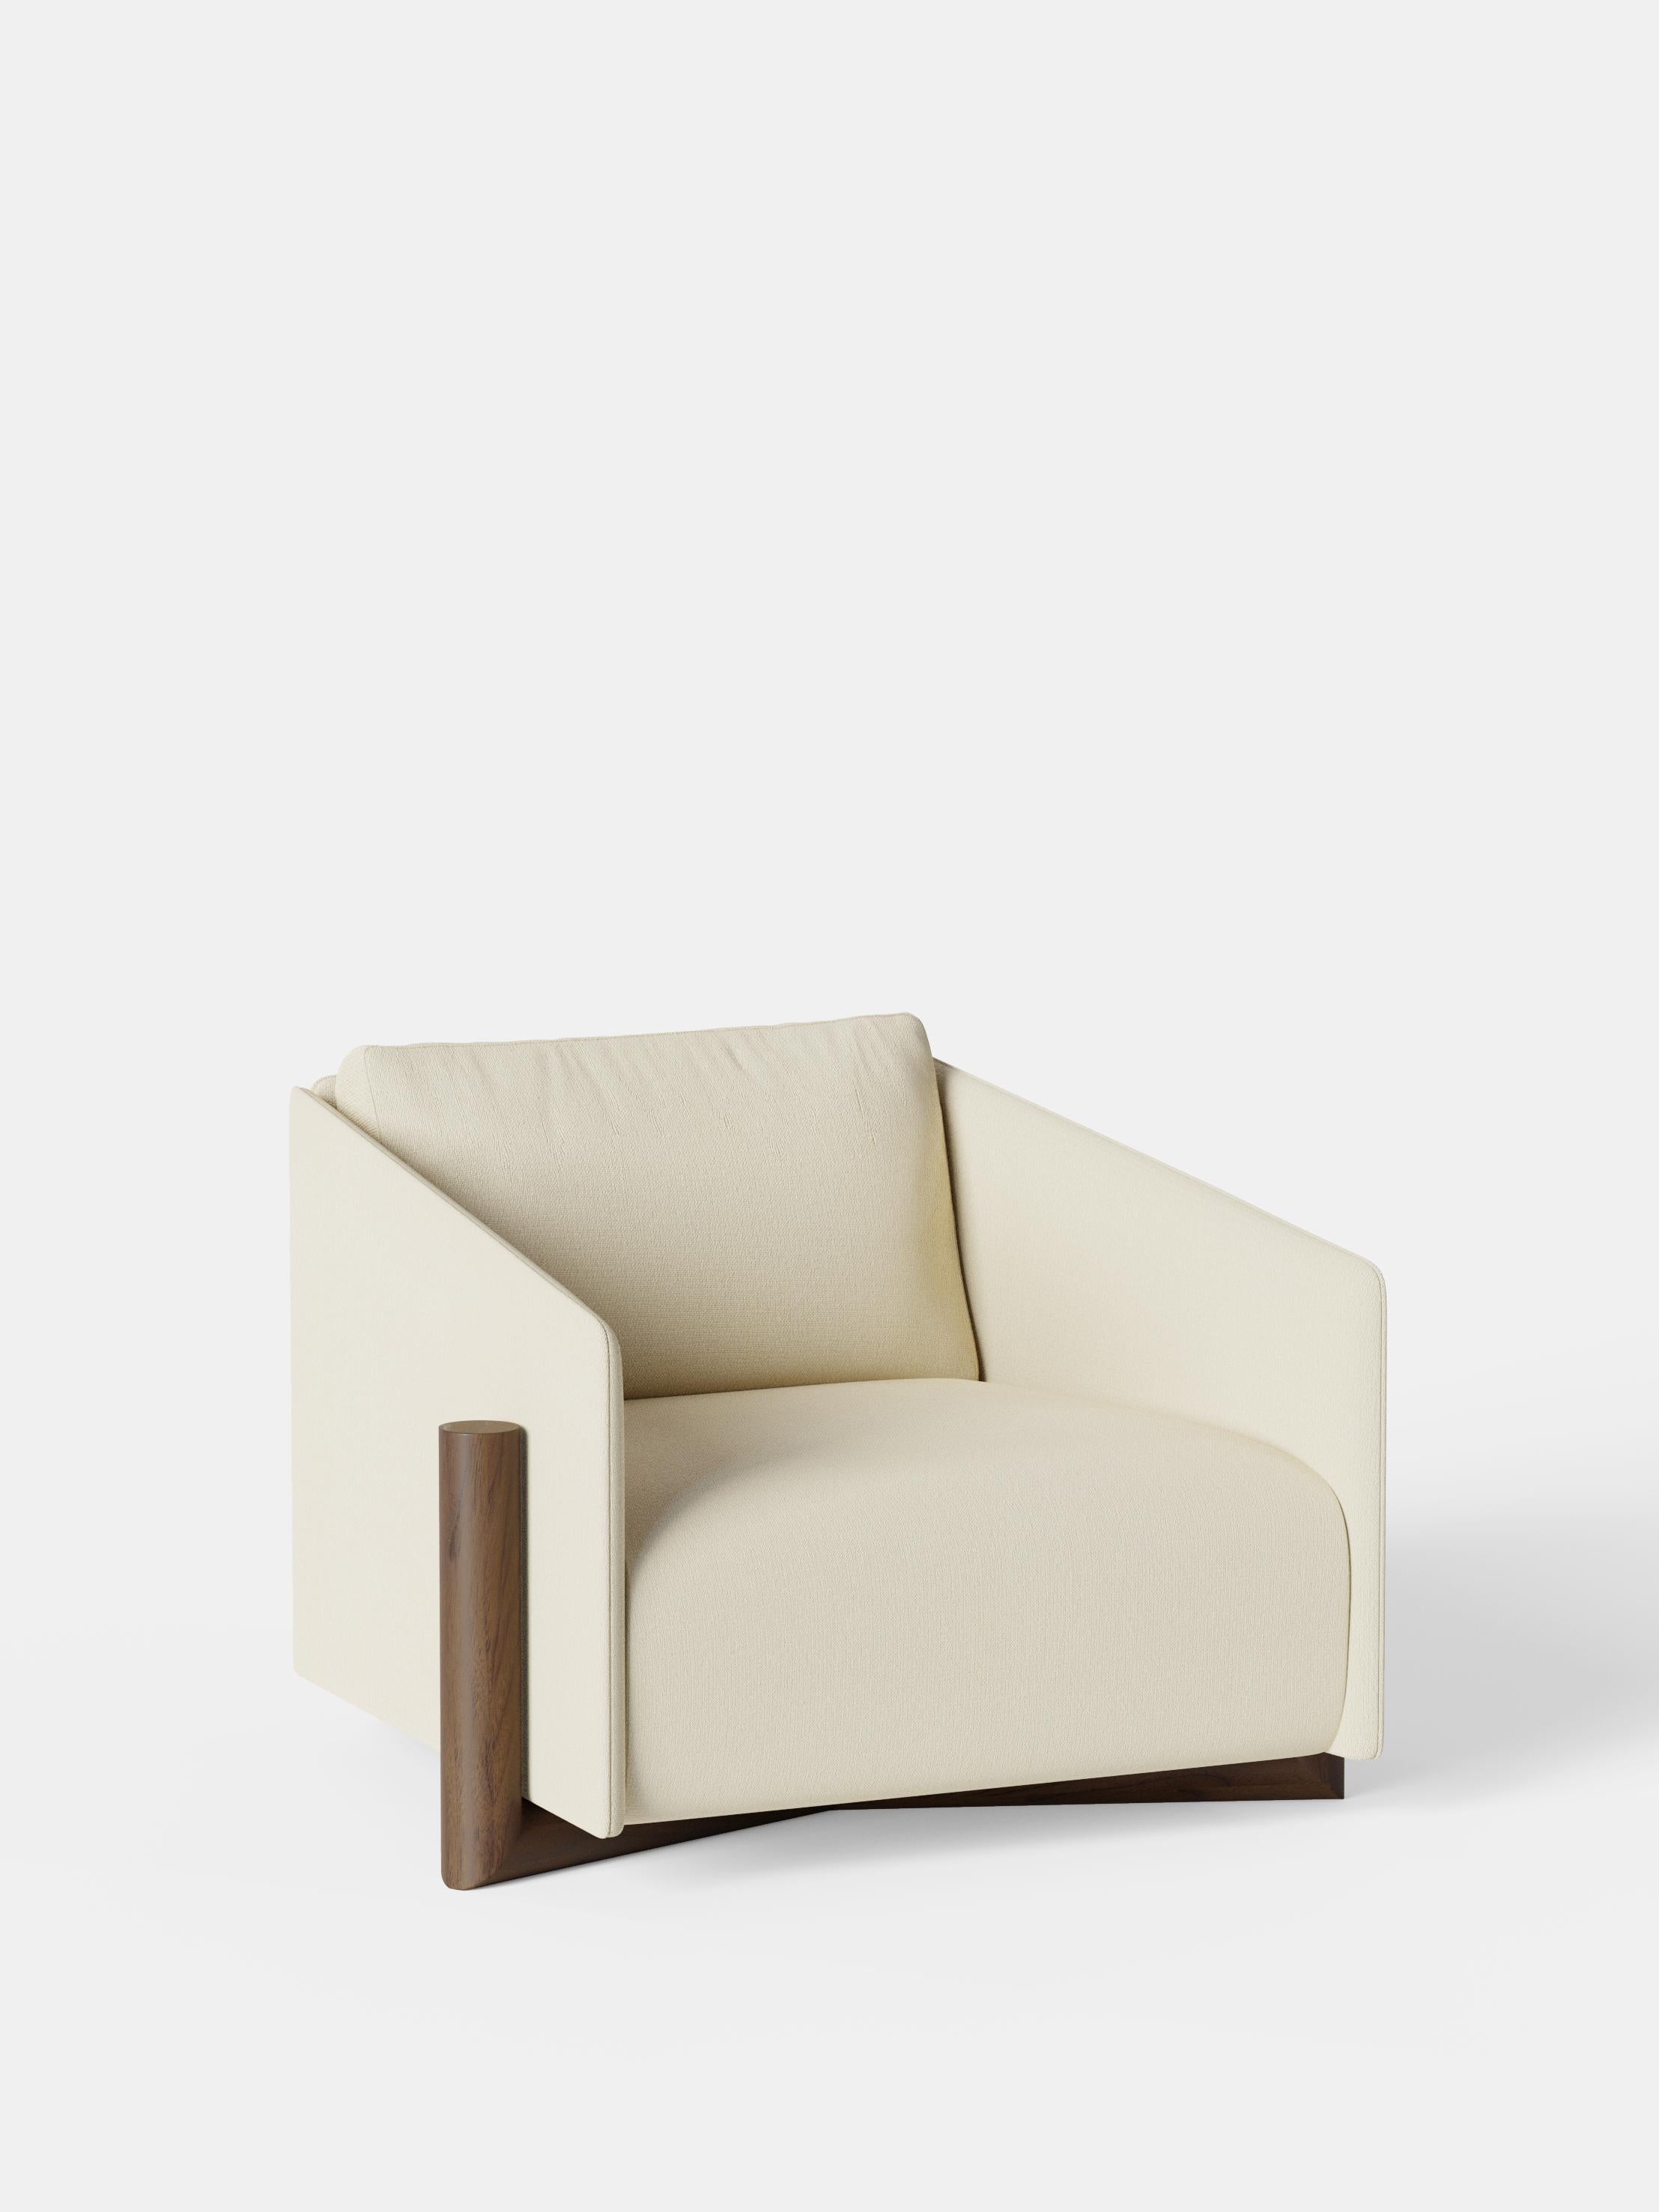 Cream Timber Armchair by Kann Design
Dimensions: D 104.5 x W 93 x H 75 cm.
Materials: Solid beech walnut finish base, wood frame, elastic belts, HR foam, fabric upholstery Kvadrat Vidar 1062 (94% wool, 6% nylon).
Available in other fabrics.

The